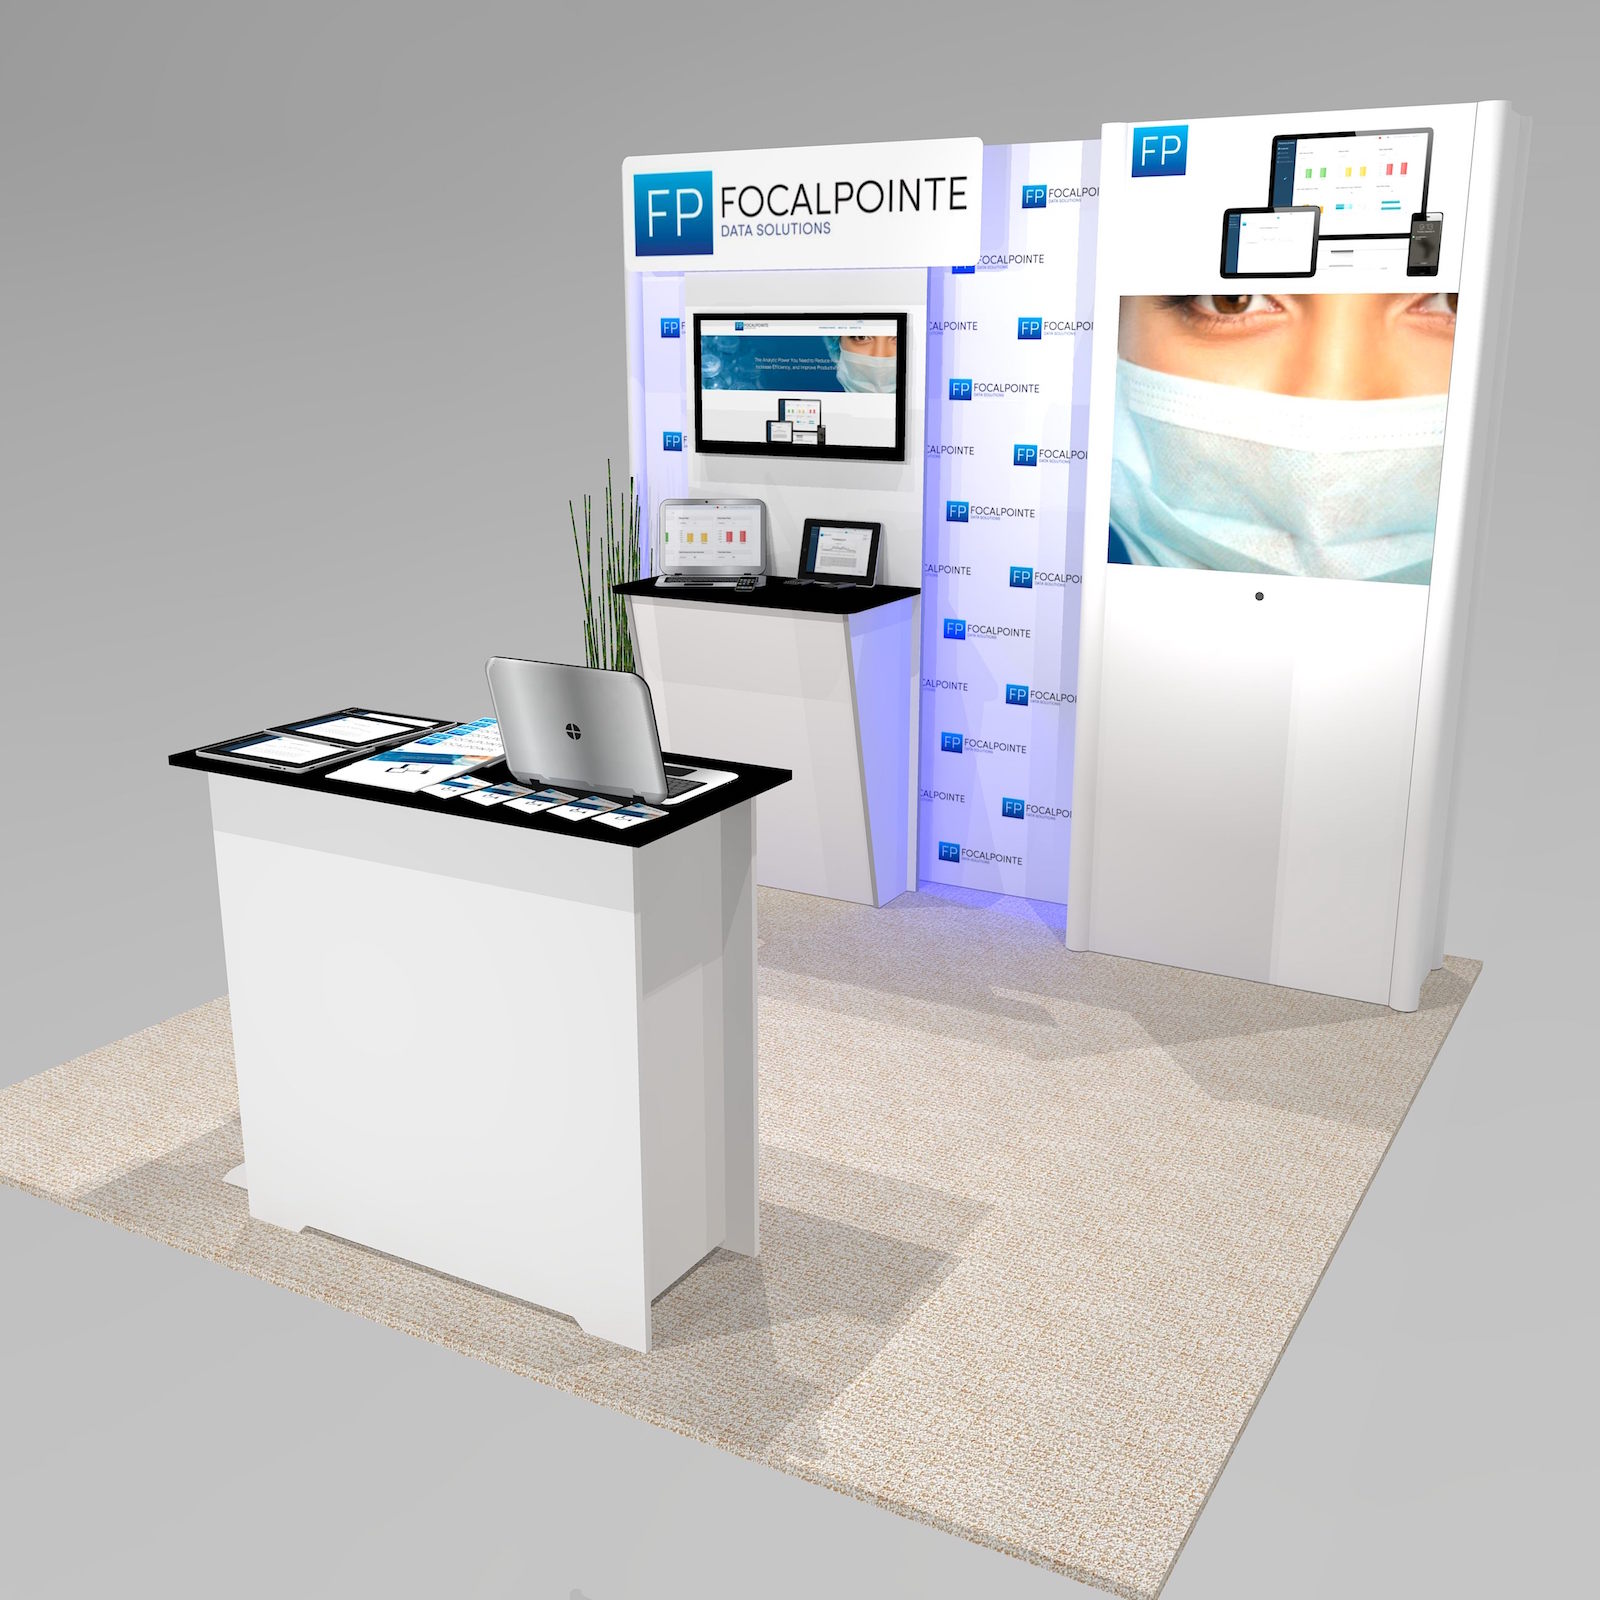 The IM1 trade show booth design features a large back lit image on the tower, with silhouette lighting behind the monitor wall section. Panel and logo sign above stand 6” in front of the main back wall for a custom 3D look. Lighting and signage make an impact. View 3